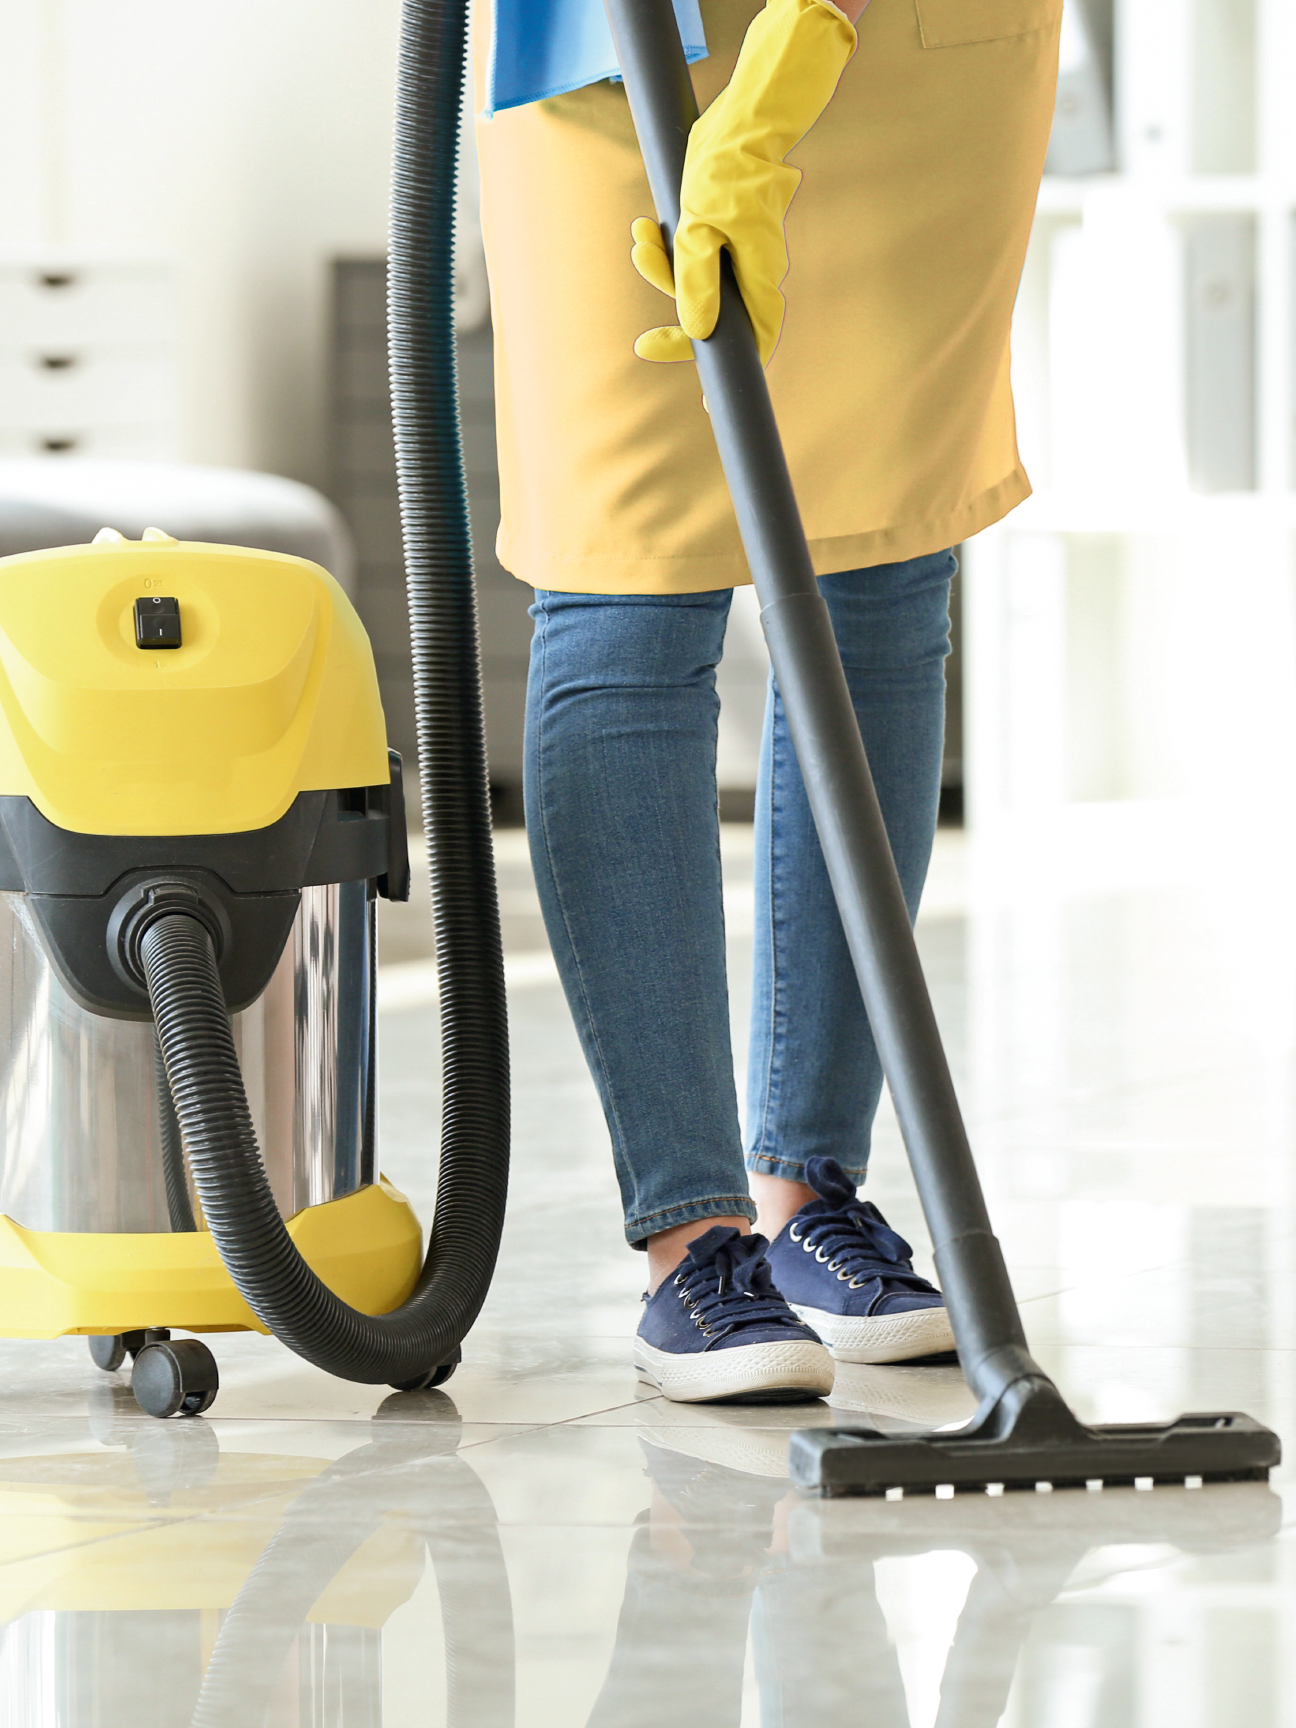 a woman wearing a yellow apron using an electronic mopping machine in the process of mopping a white floor